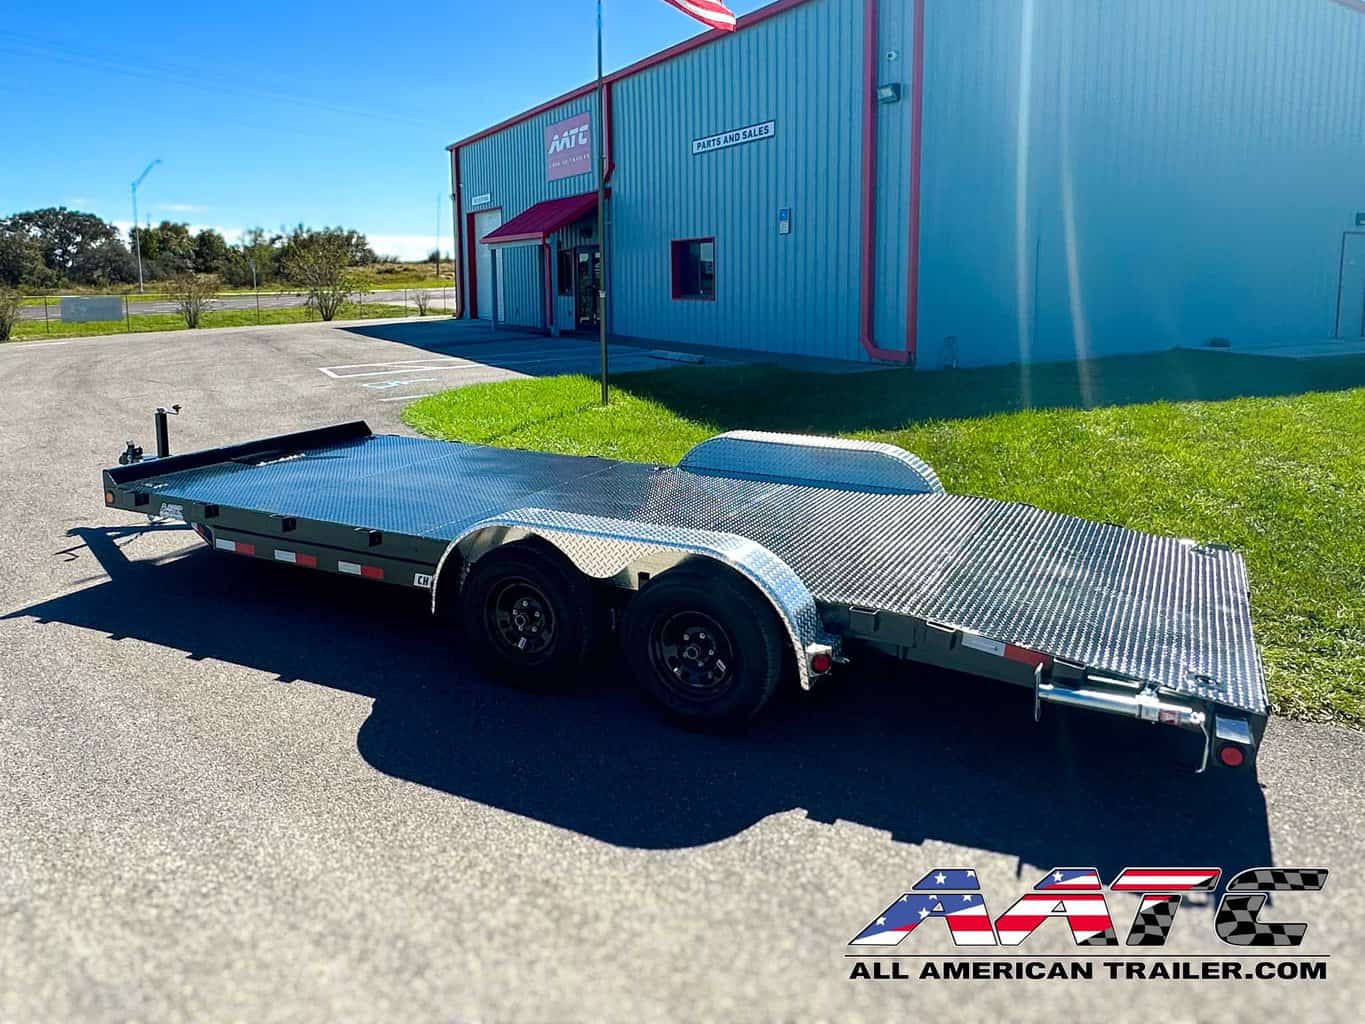 A PJ 20-foot steel deck car hauler trailer, model CH-202-SIR, designed for efficient vehicle transportation. This PJ Trailer features a 4-foot dovetail with 5-foot slide-in ramps, making it easy to load and unload vehicles. With a 3.5-ton capacity, a 7,000 GVWR, electric brakes, and a black finish, it's a durable and practical choice for car hauling. The bumper pull design allows for convenient towing.